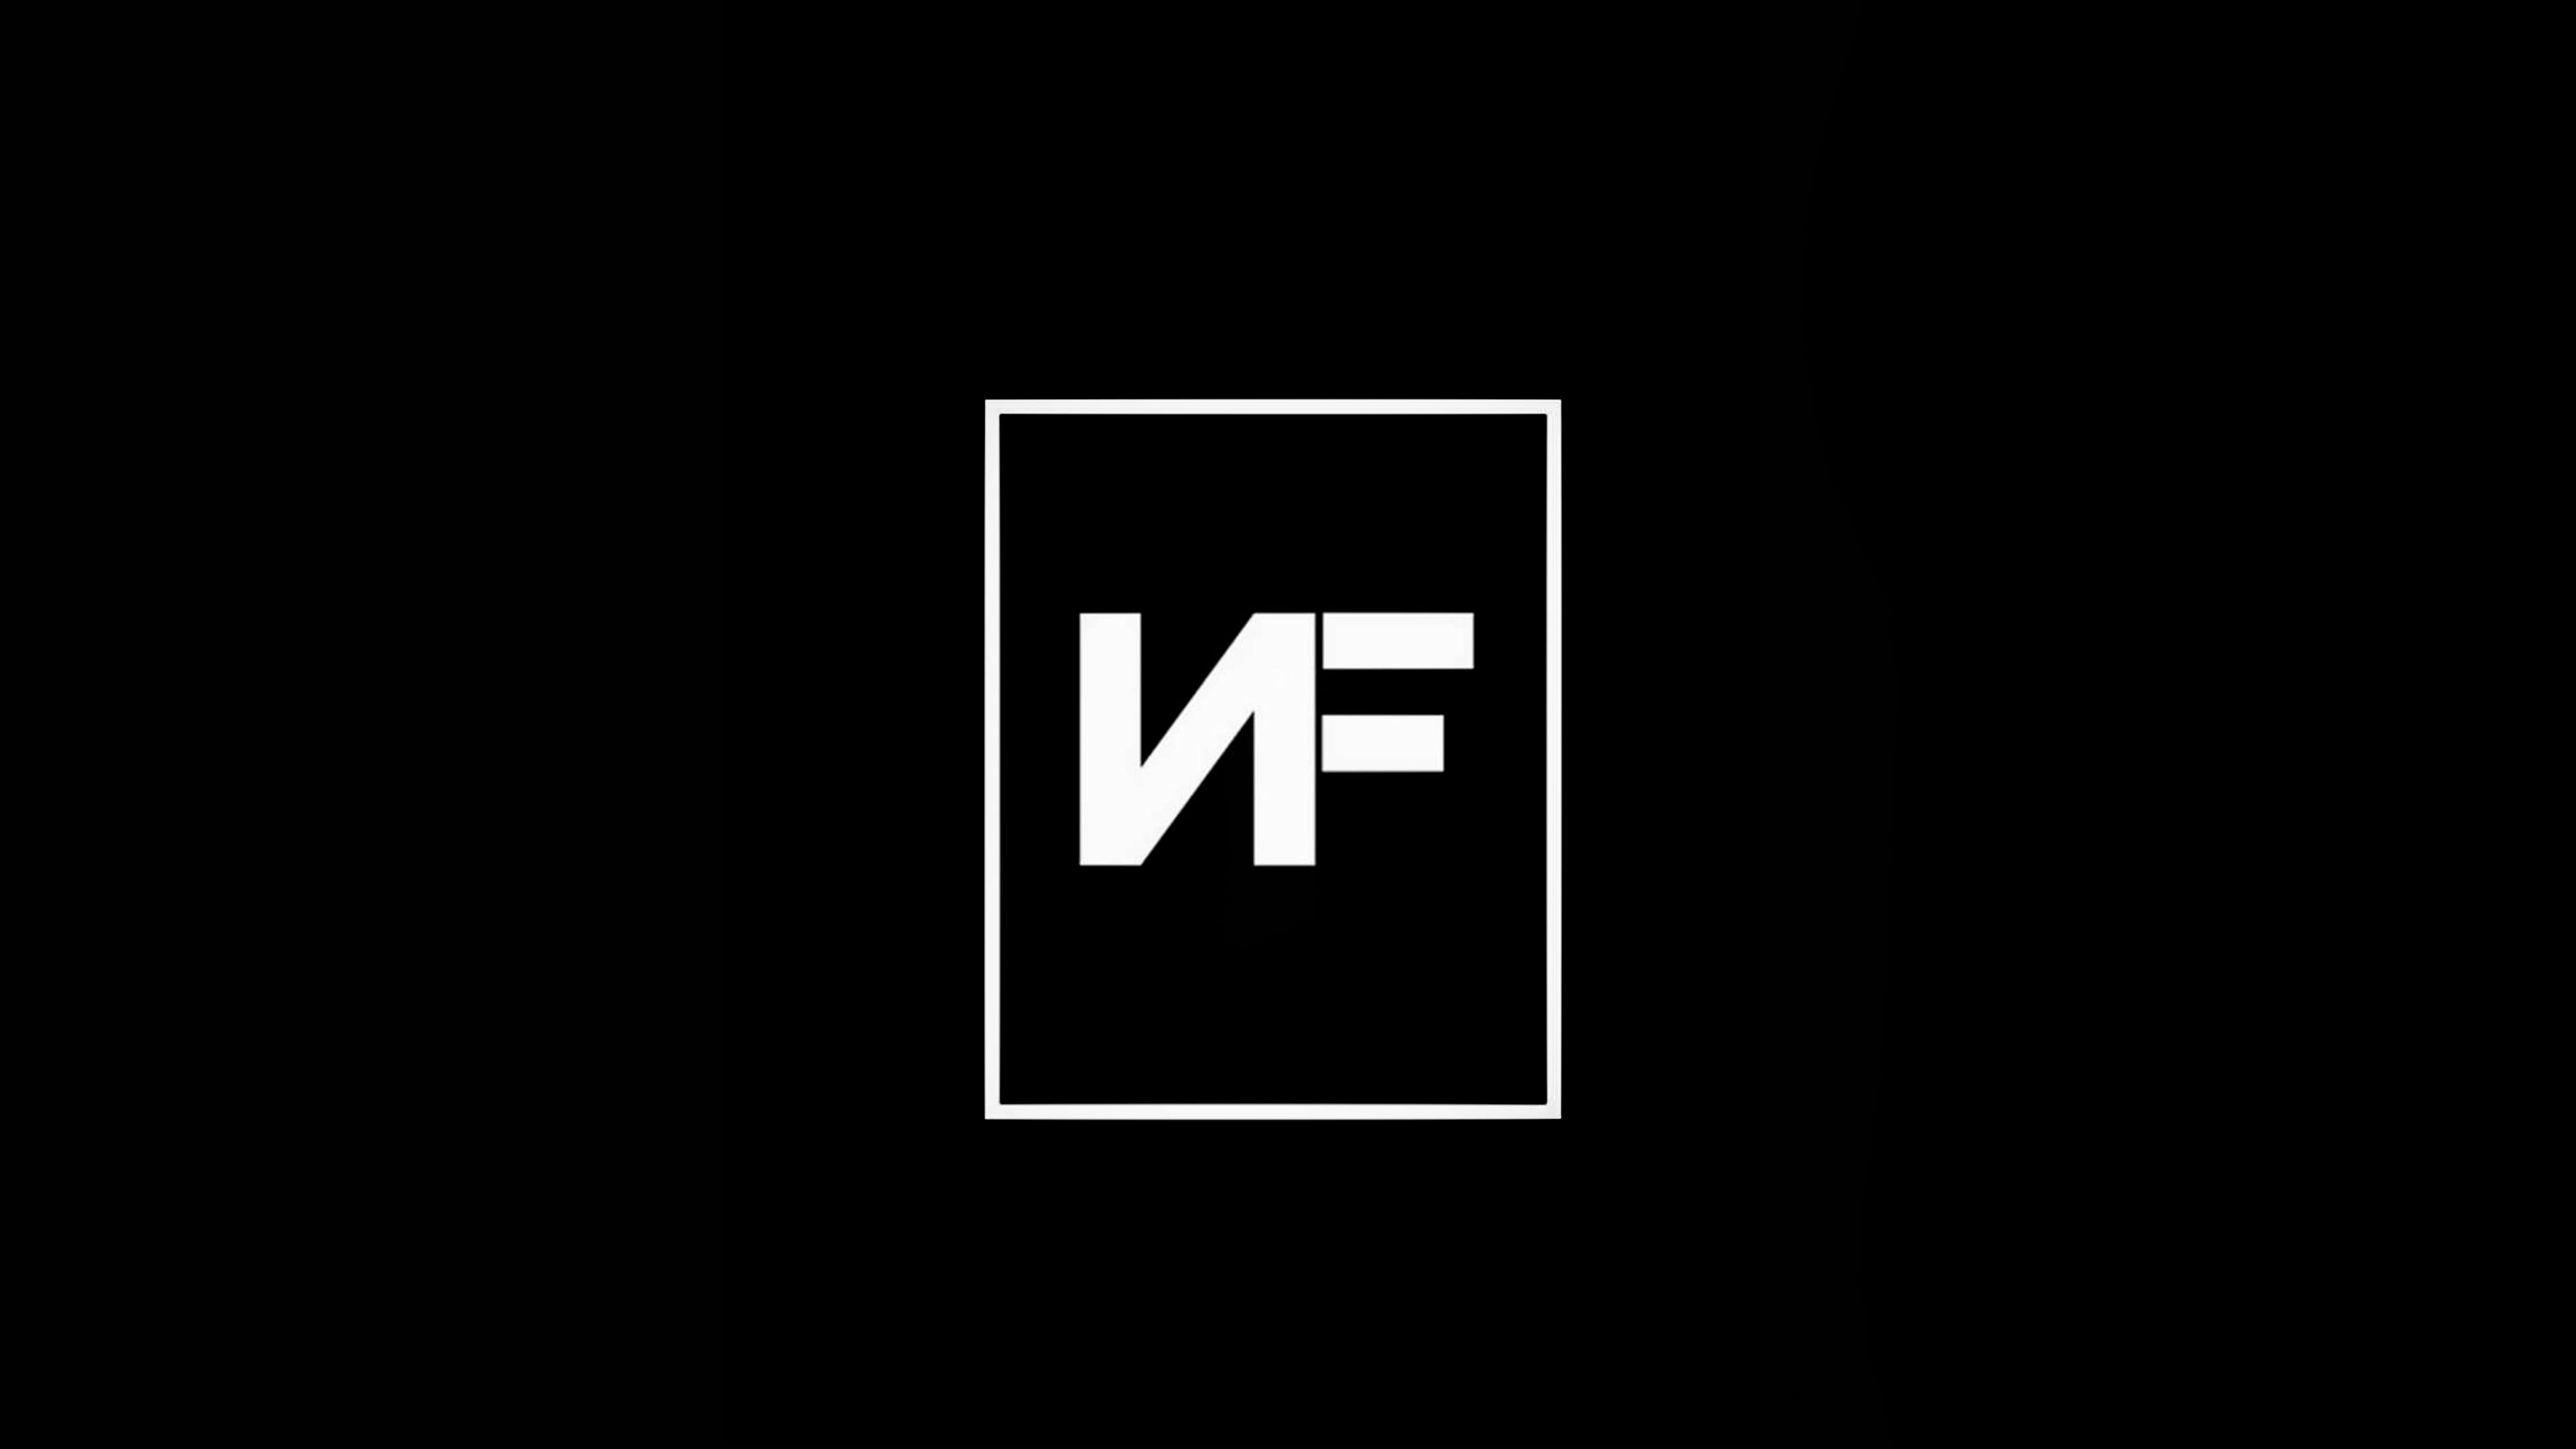 A simple NF wallpaper in 4K for PC